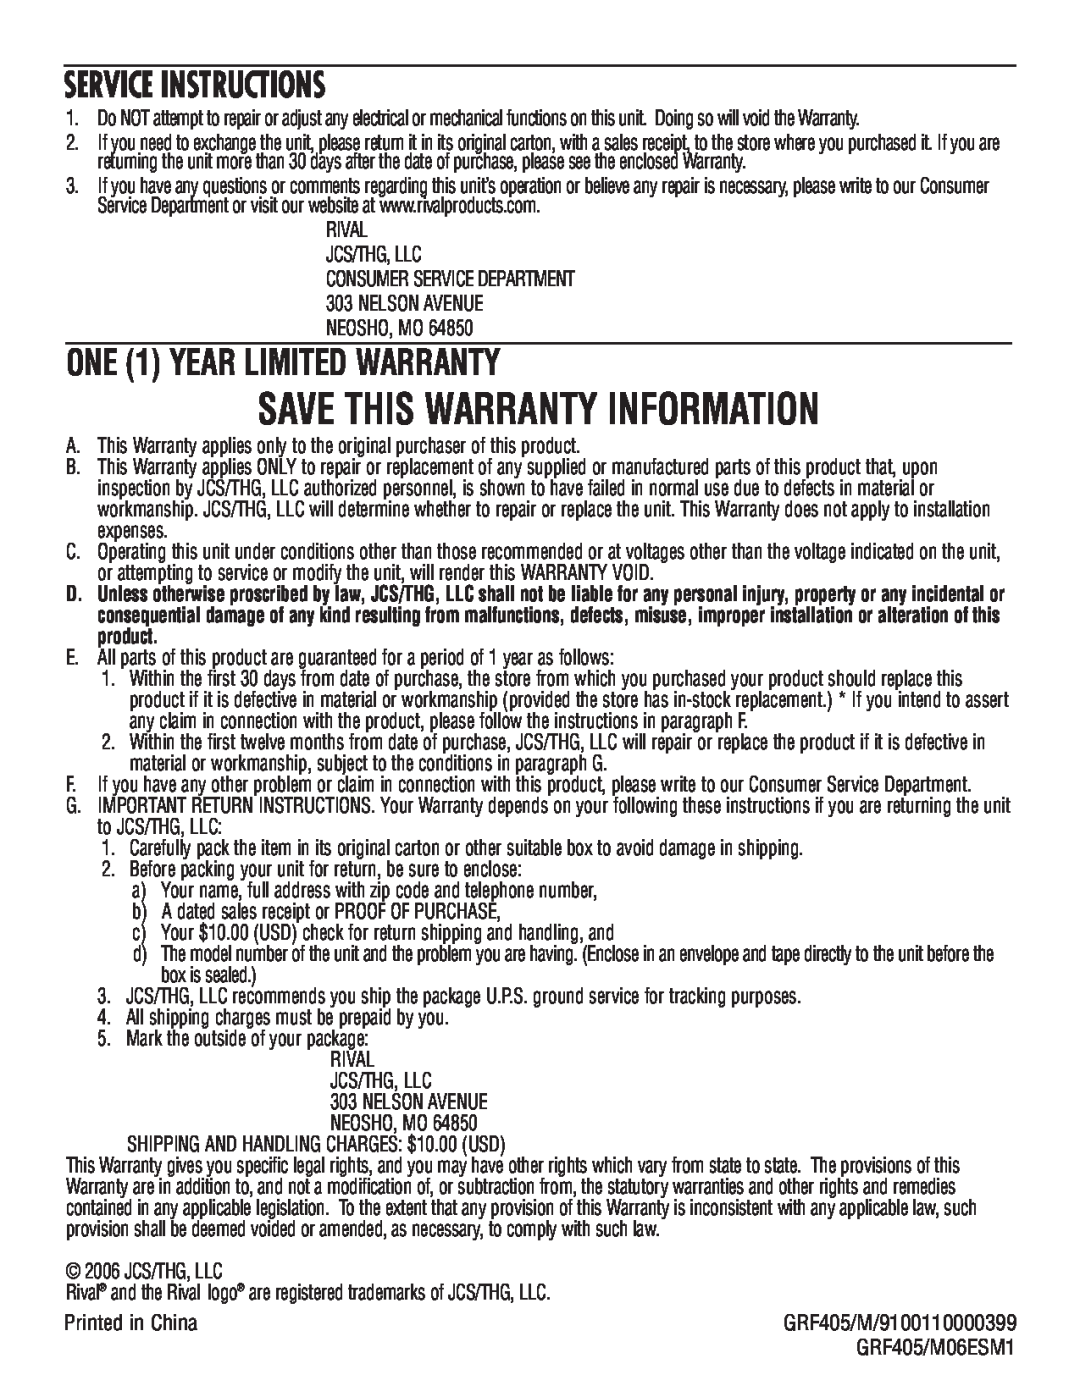 Rival GRF405M manual Service Instructions, ONE 1 YEAR LIMITED WARRANTY, Save This Warranty Information 